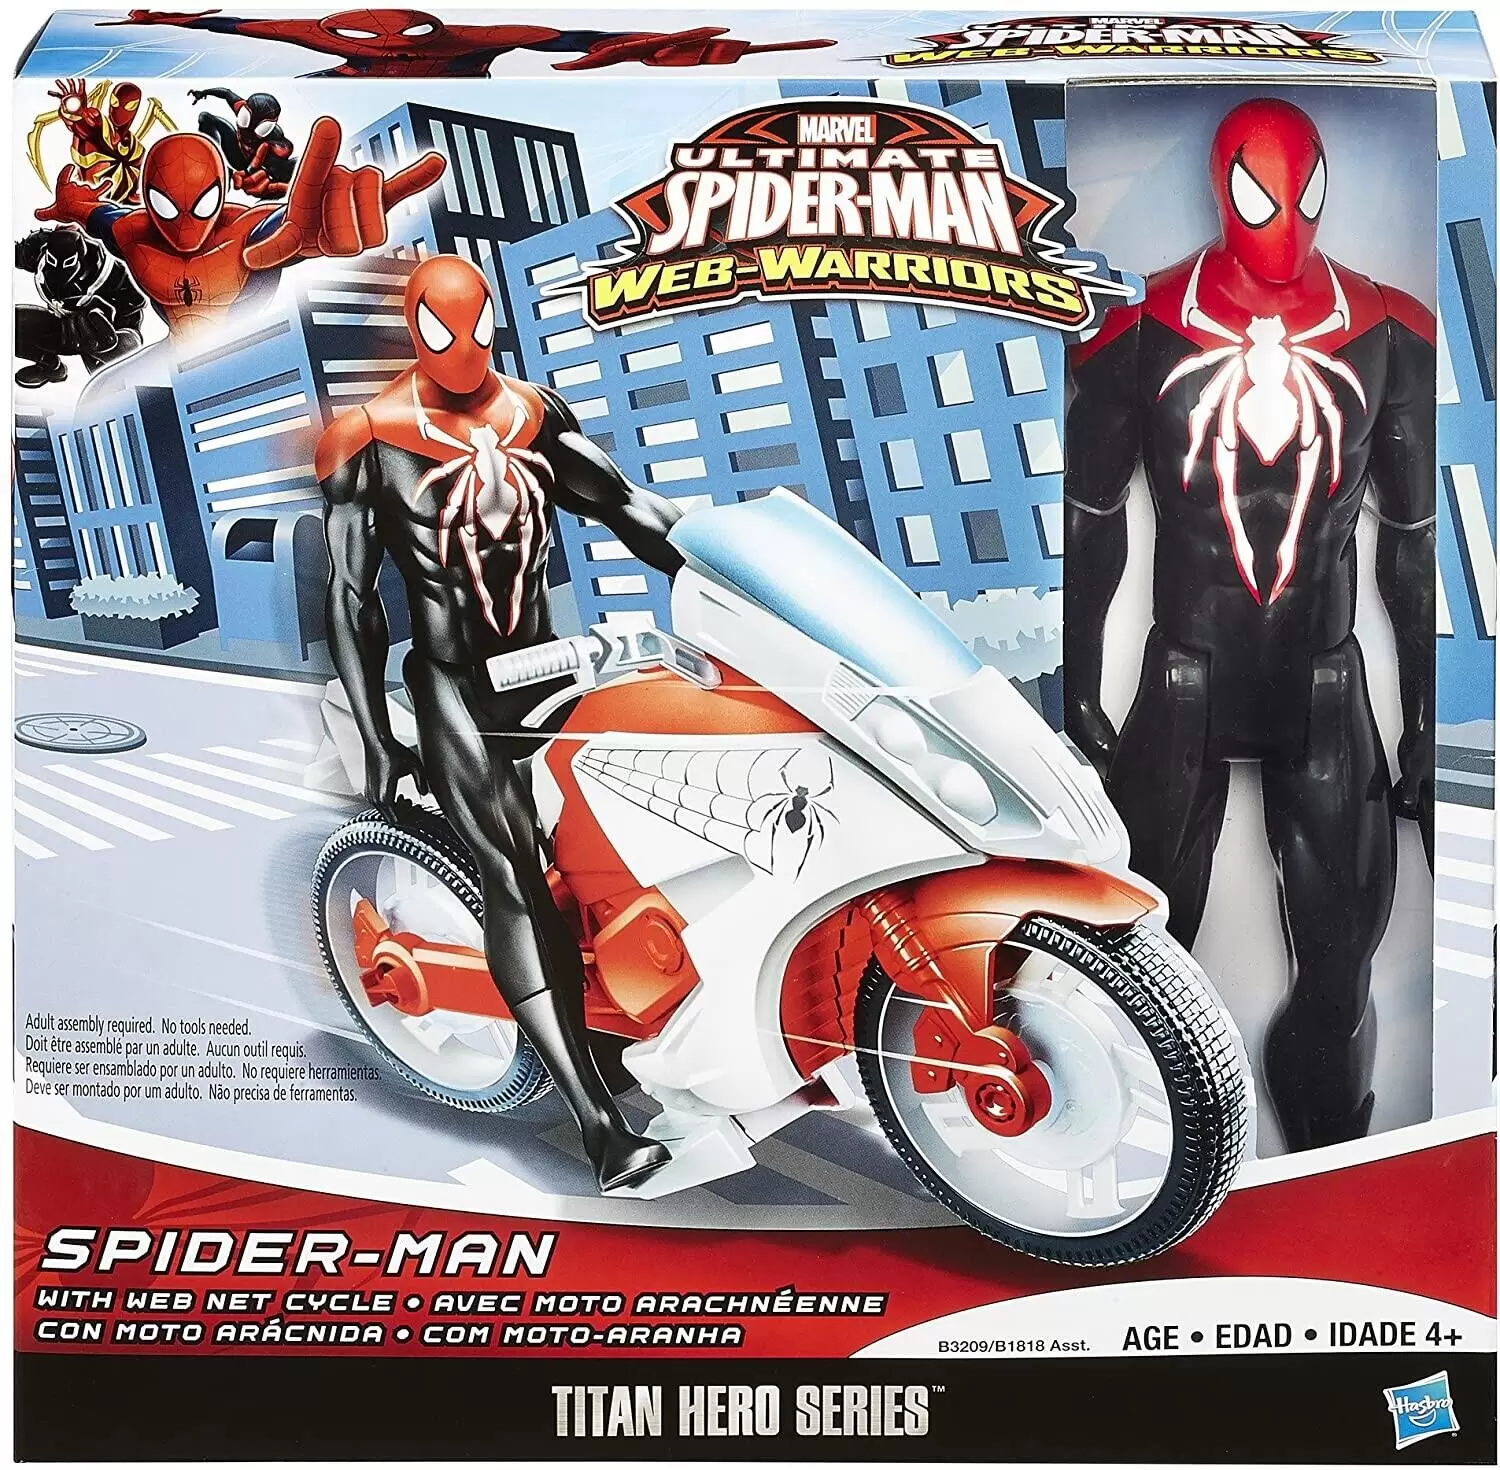 Spider-Man with Web Net Cycle - Titan Hero Series action figure